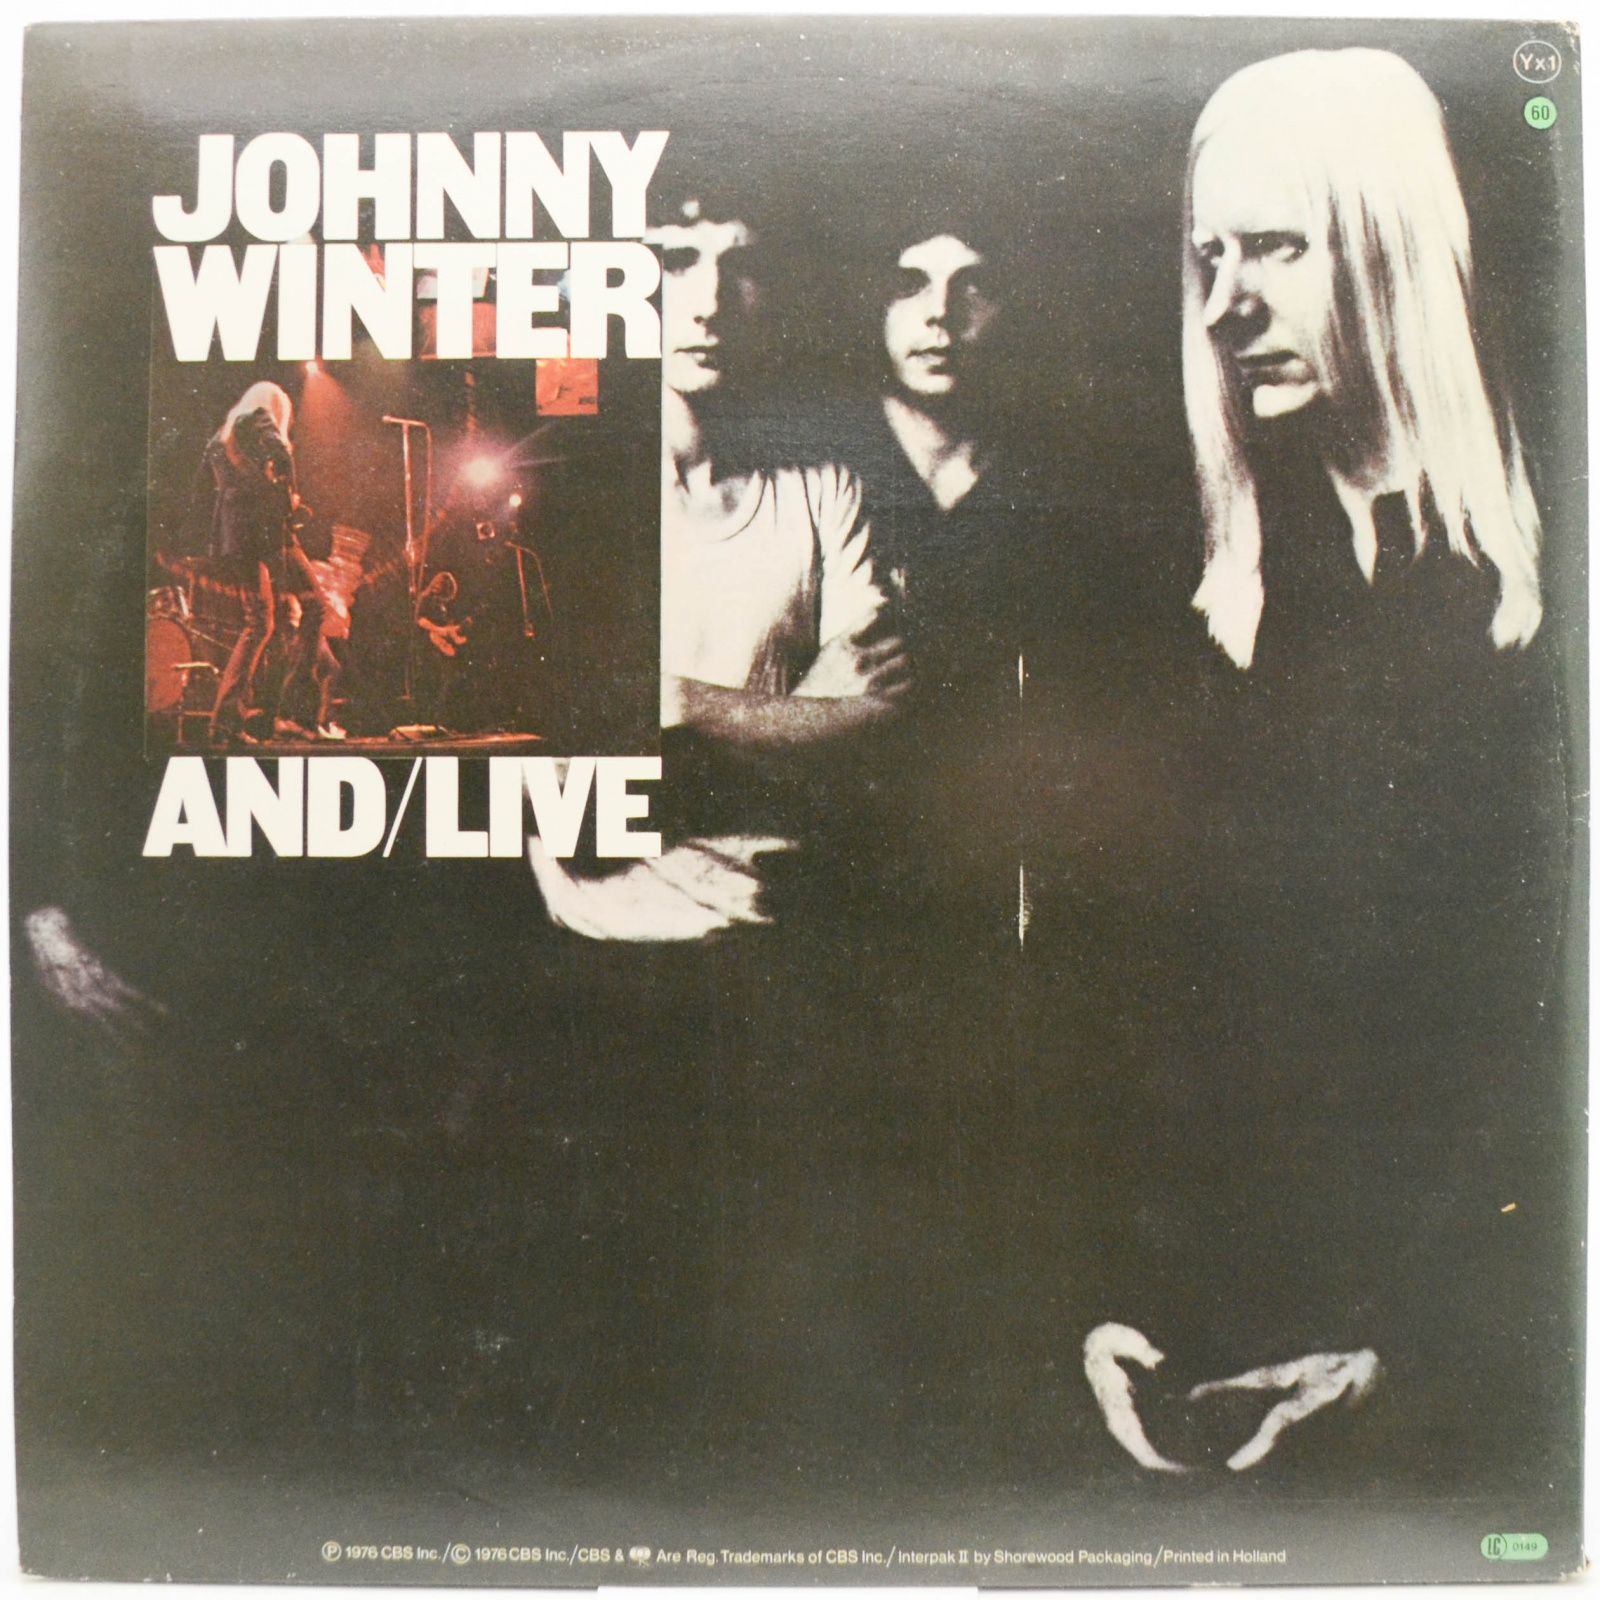 Johnny Winter — And/Live (2LP), 1975